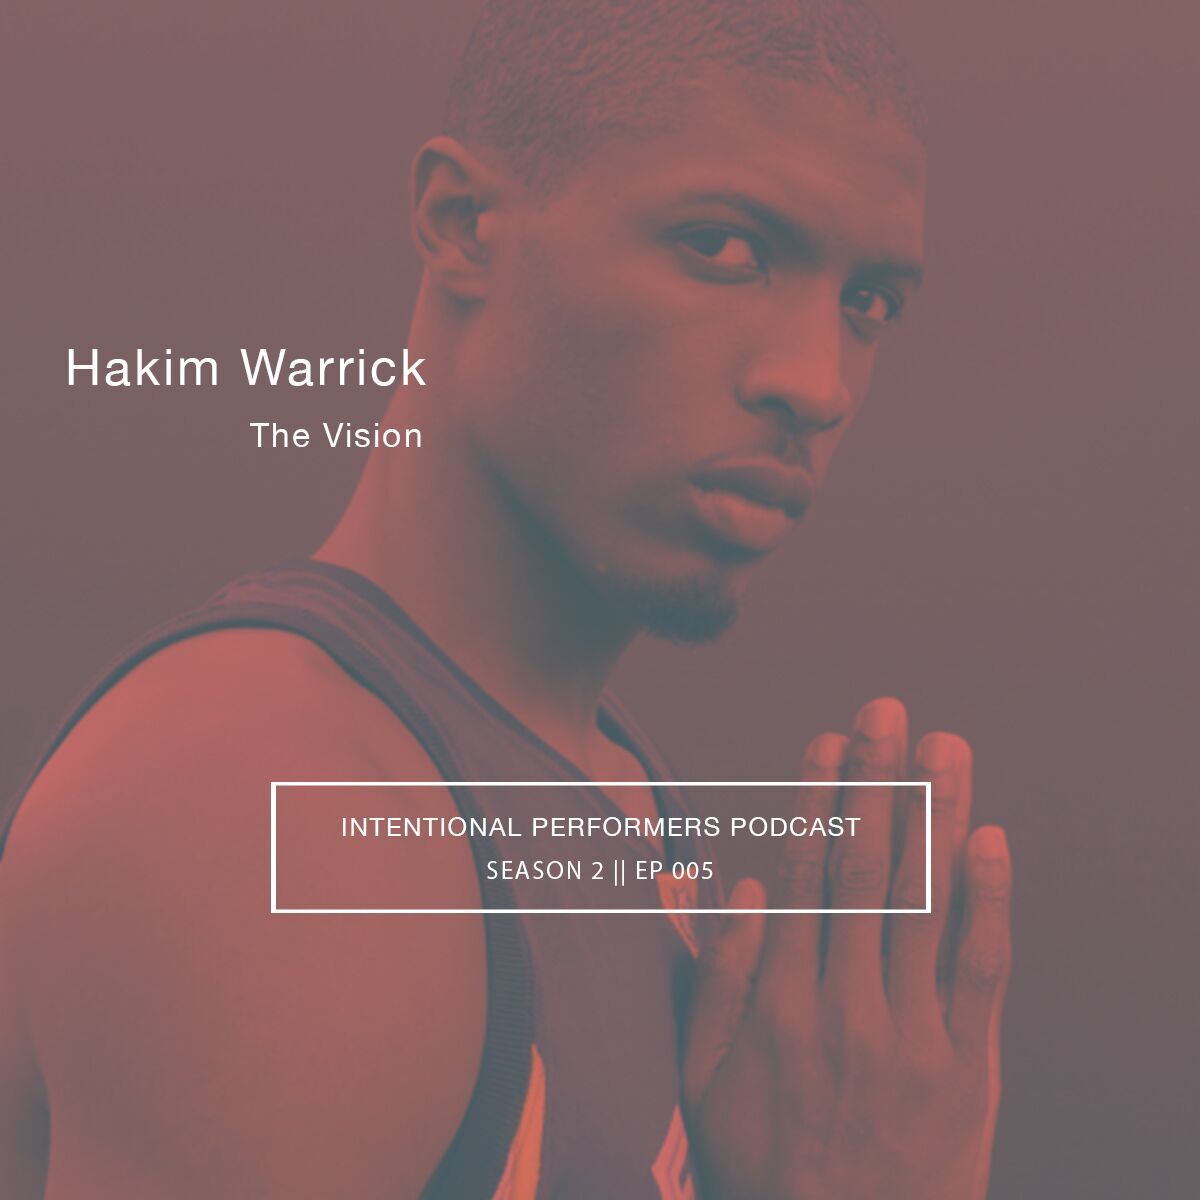 Hakim Warrick on The Vision